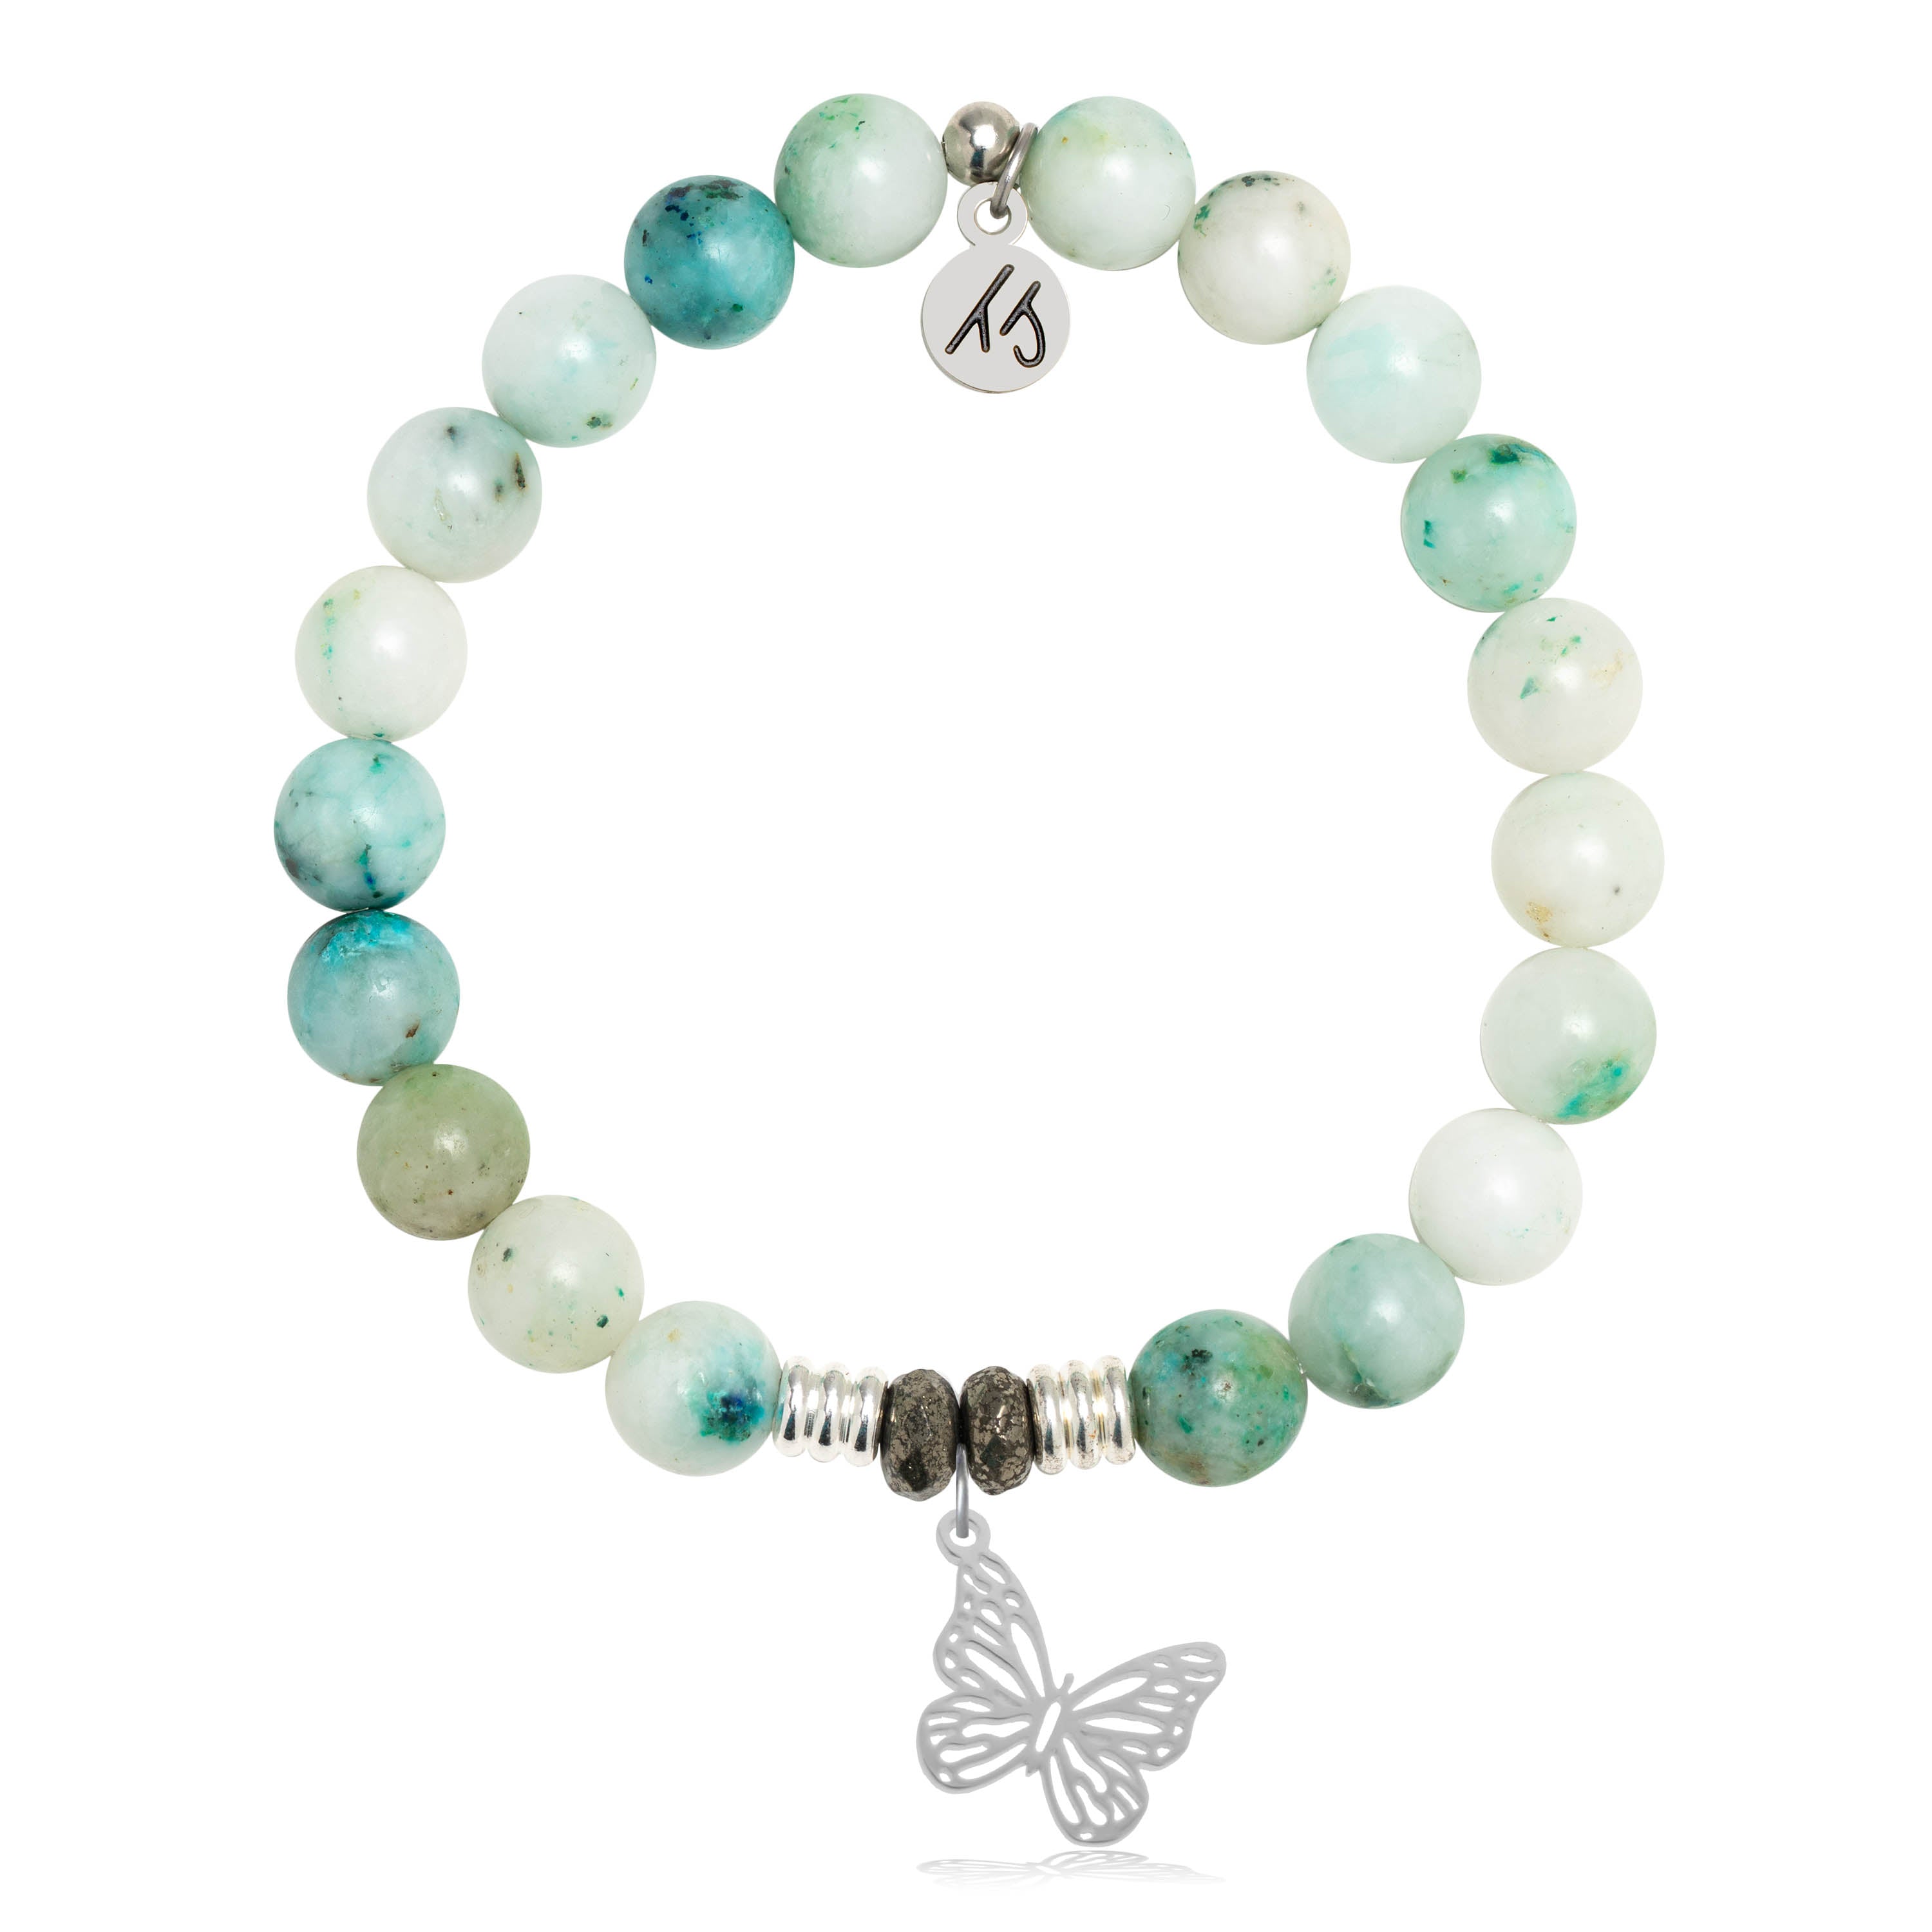 Charm bracelet, beads of imitated turquoise & silver